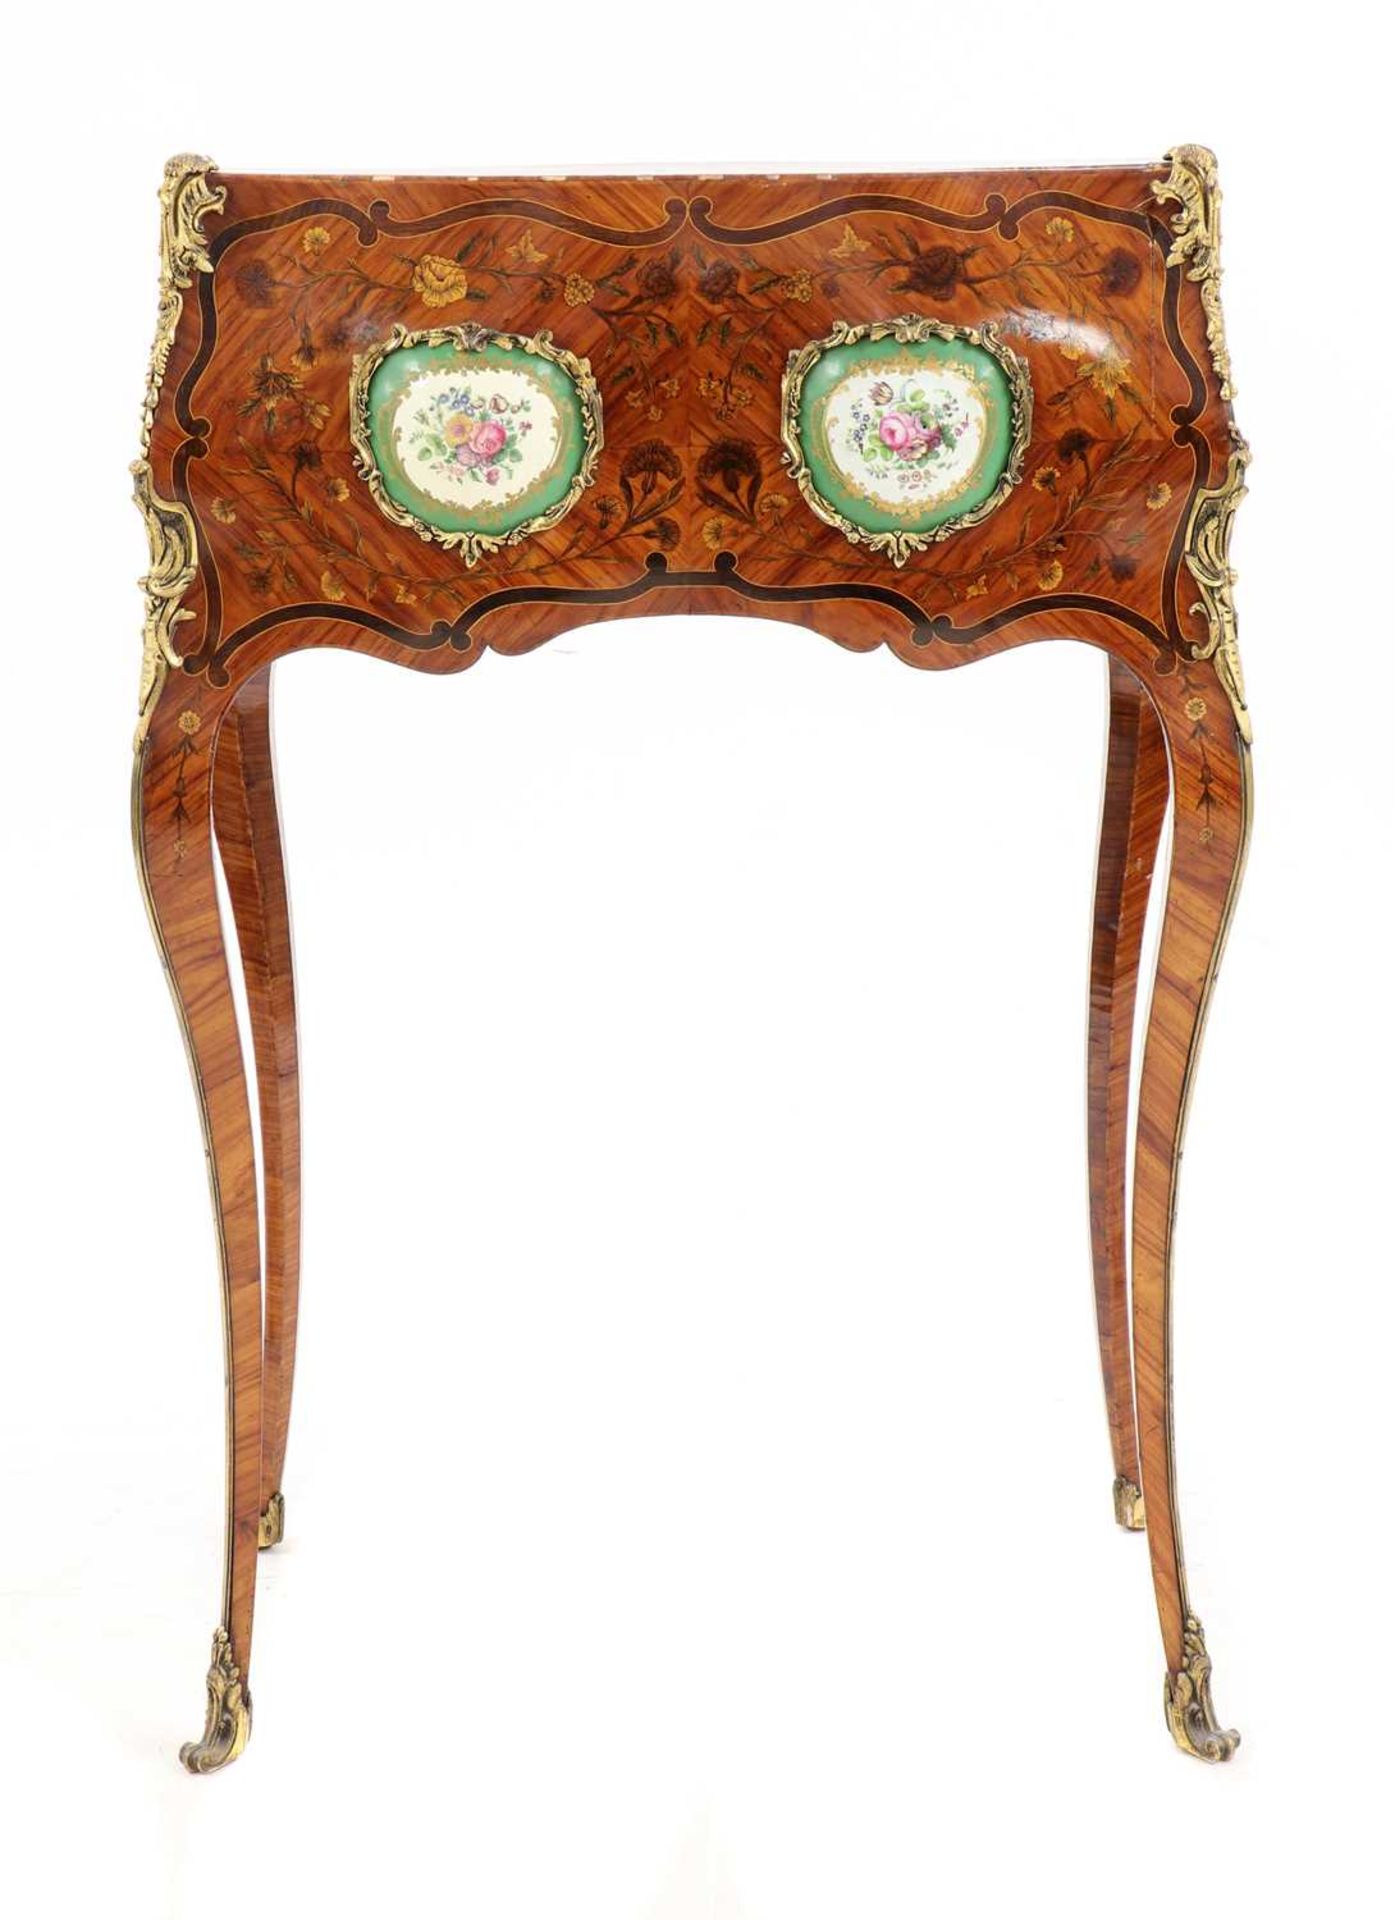 A small French Louis XV-style kingwood and marquetry bureau de dame, - Image 4 of 16